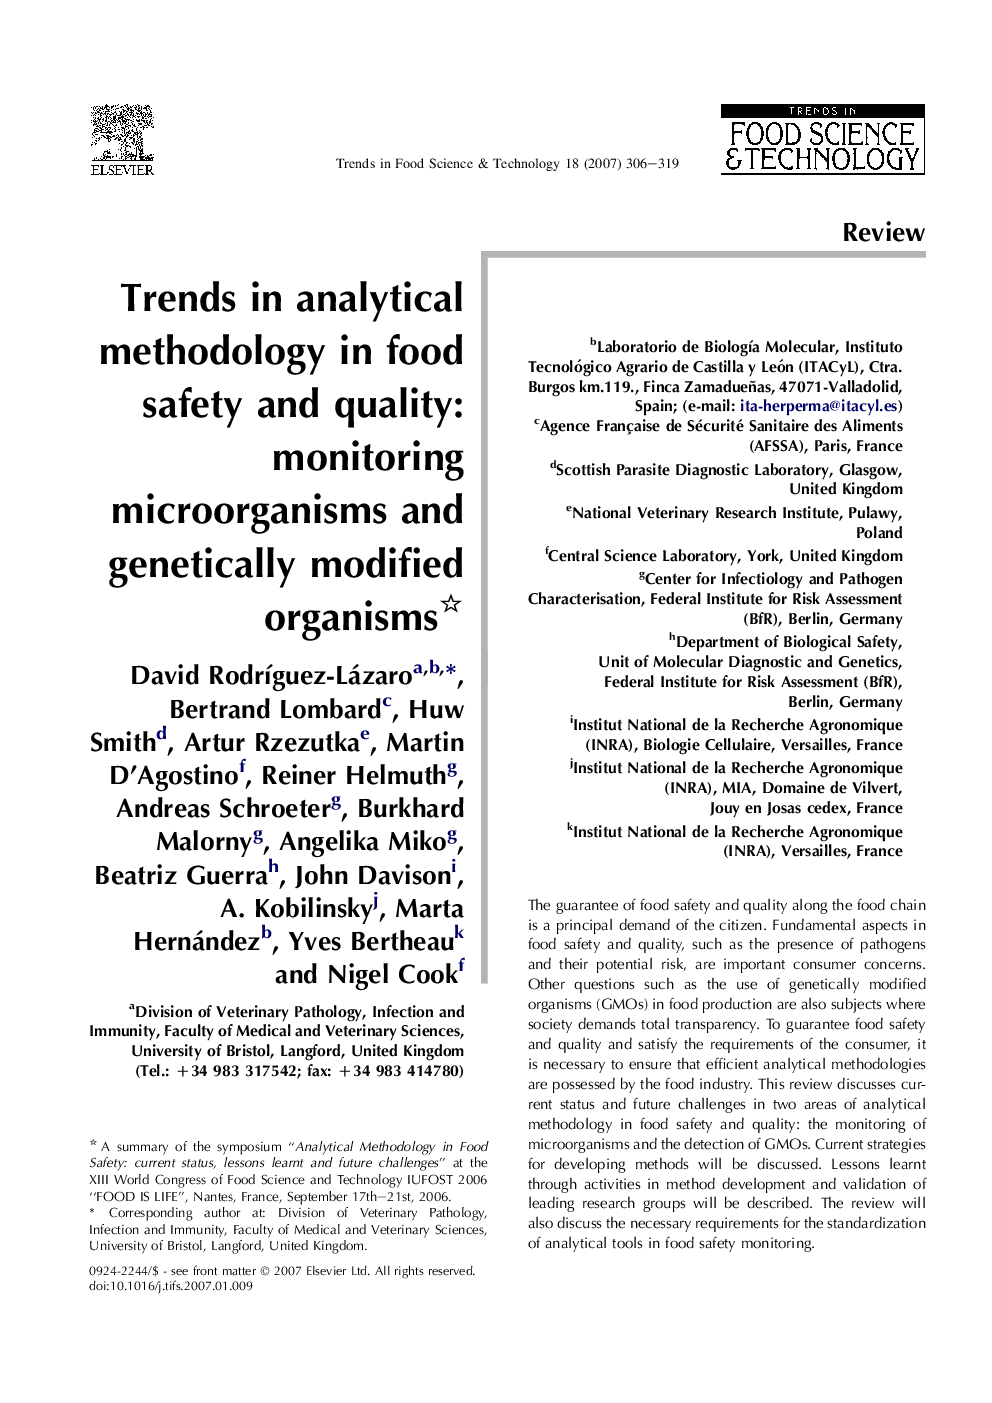 Trends in analytical methodology in food safety and quality: monitoring microorganisms and genetically modified organisms 